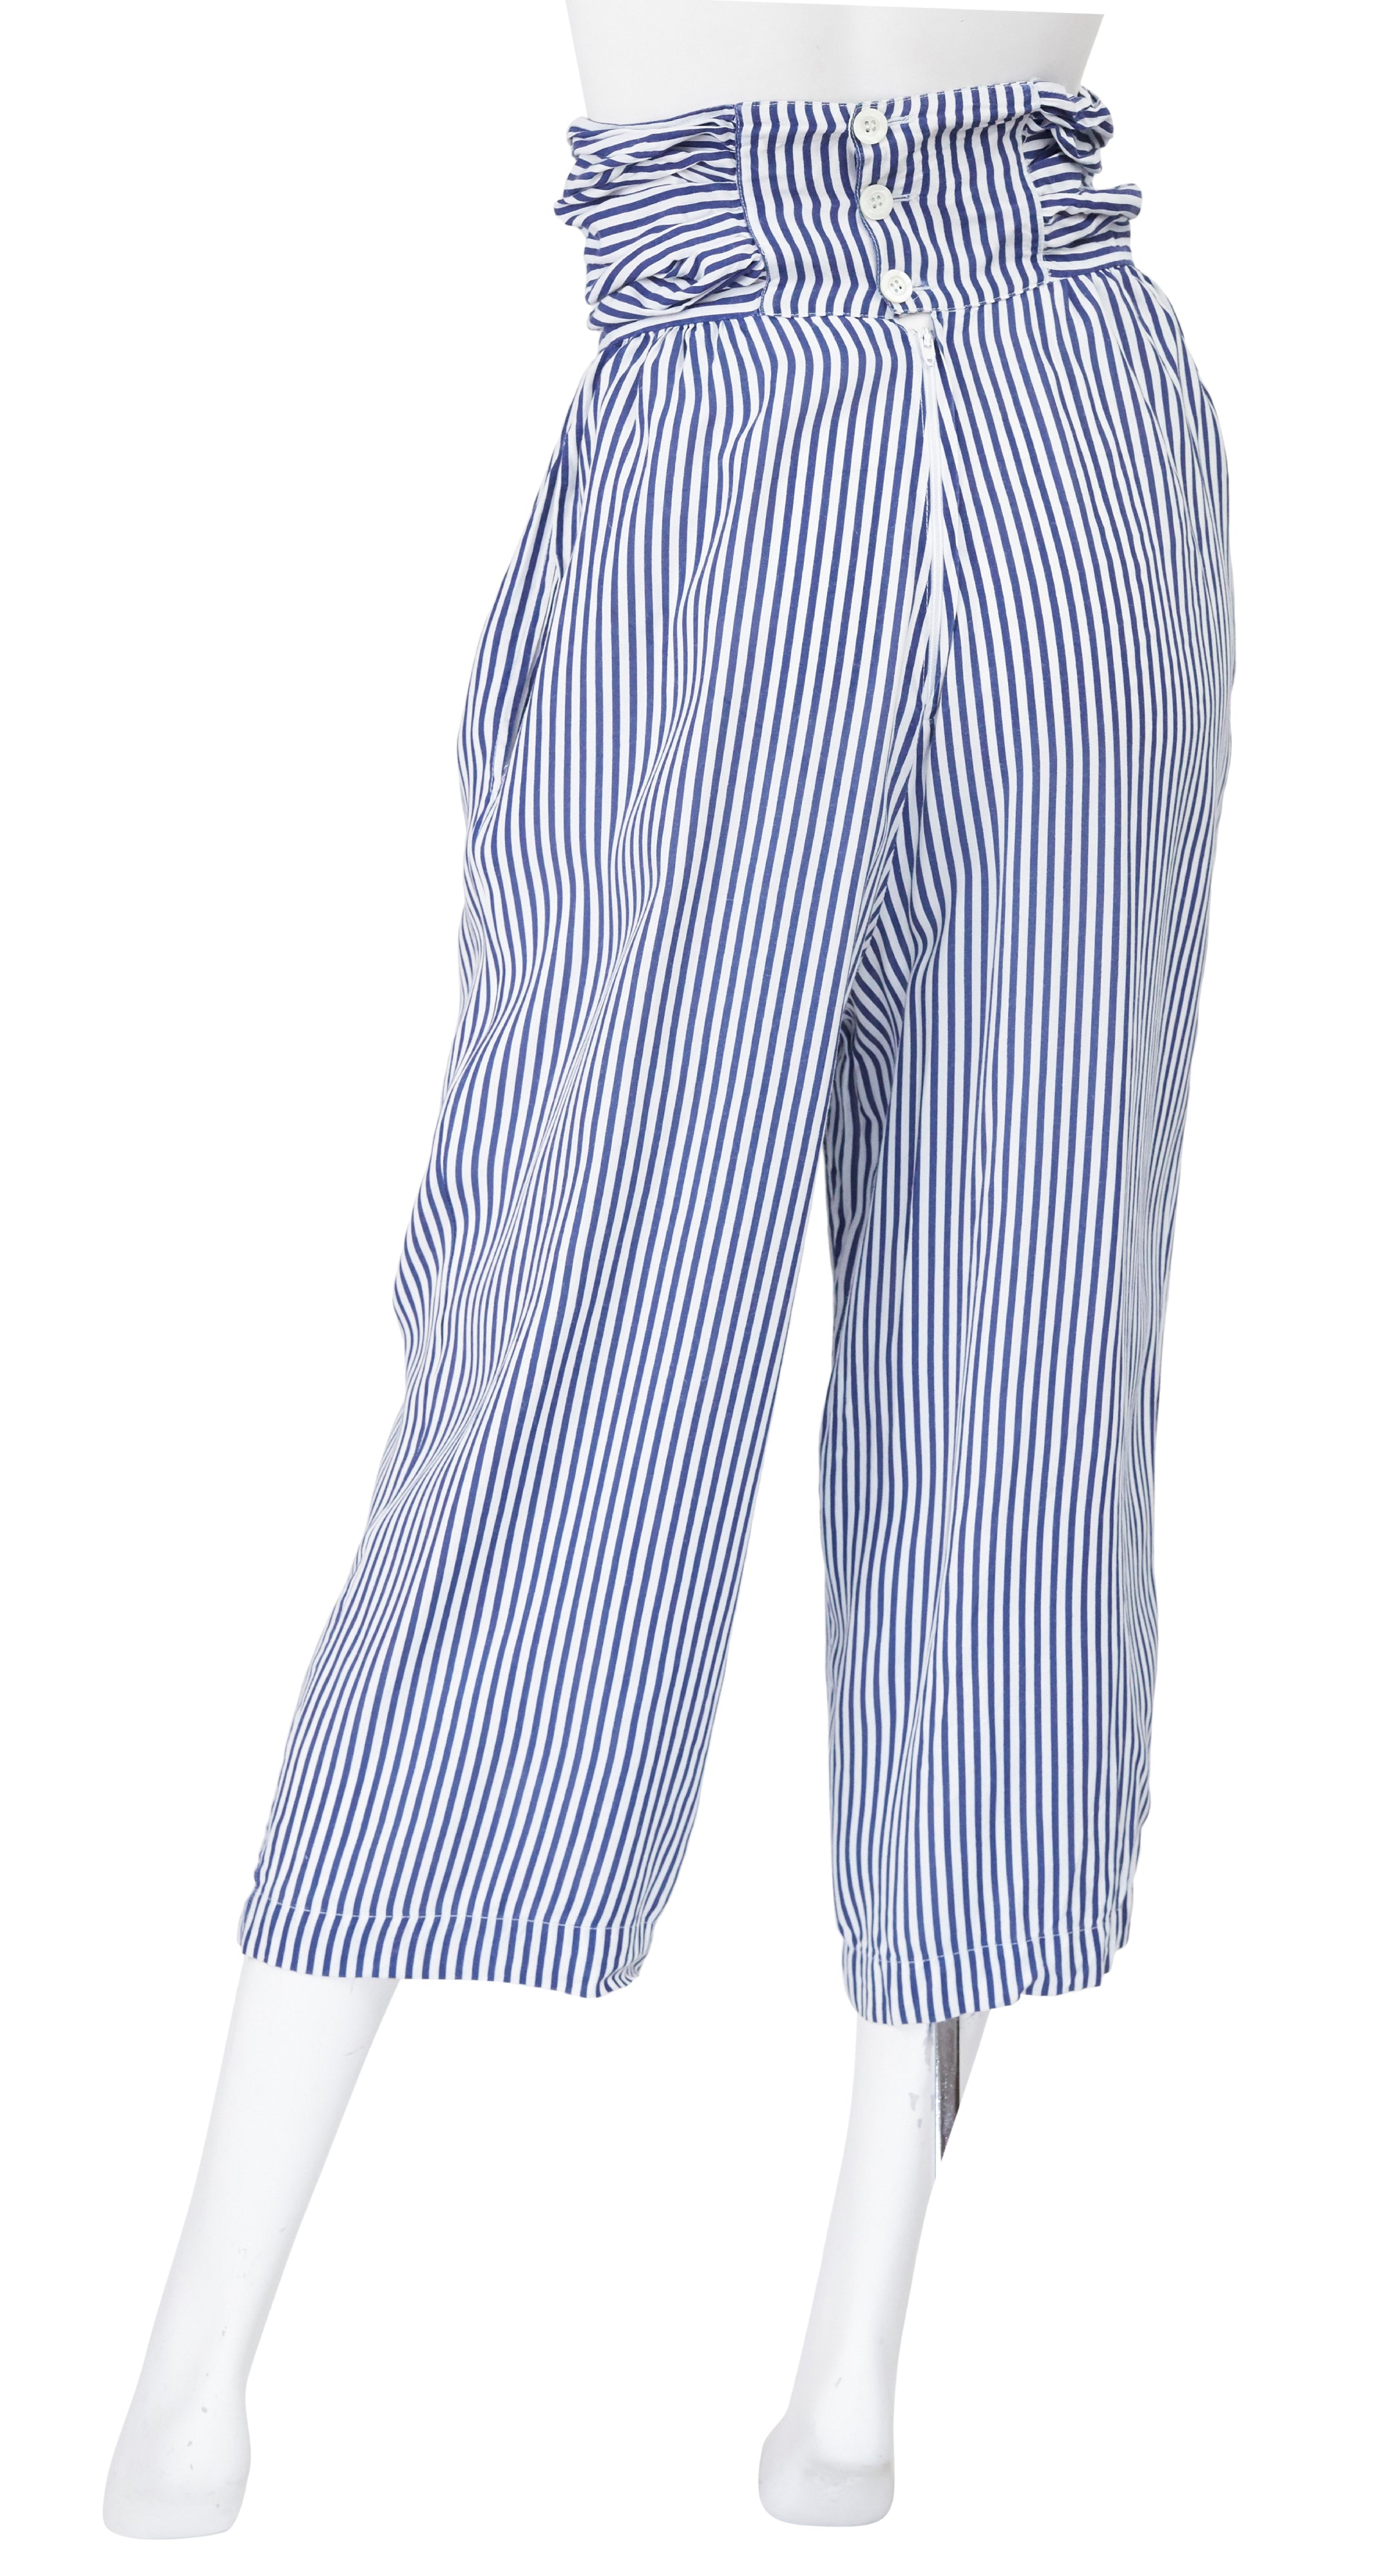 1970s White & Blue Striped Cotton High-Waisted Pants